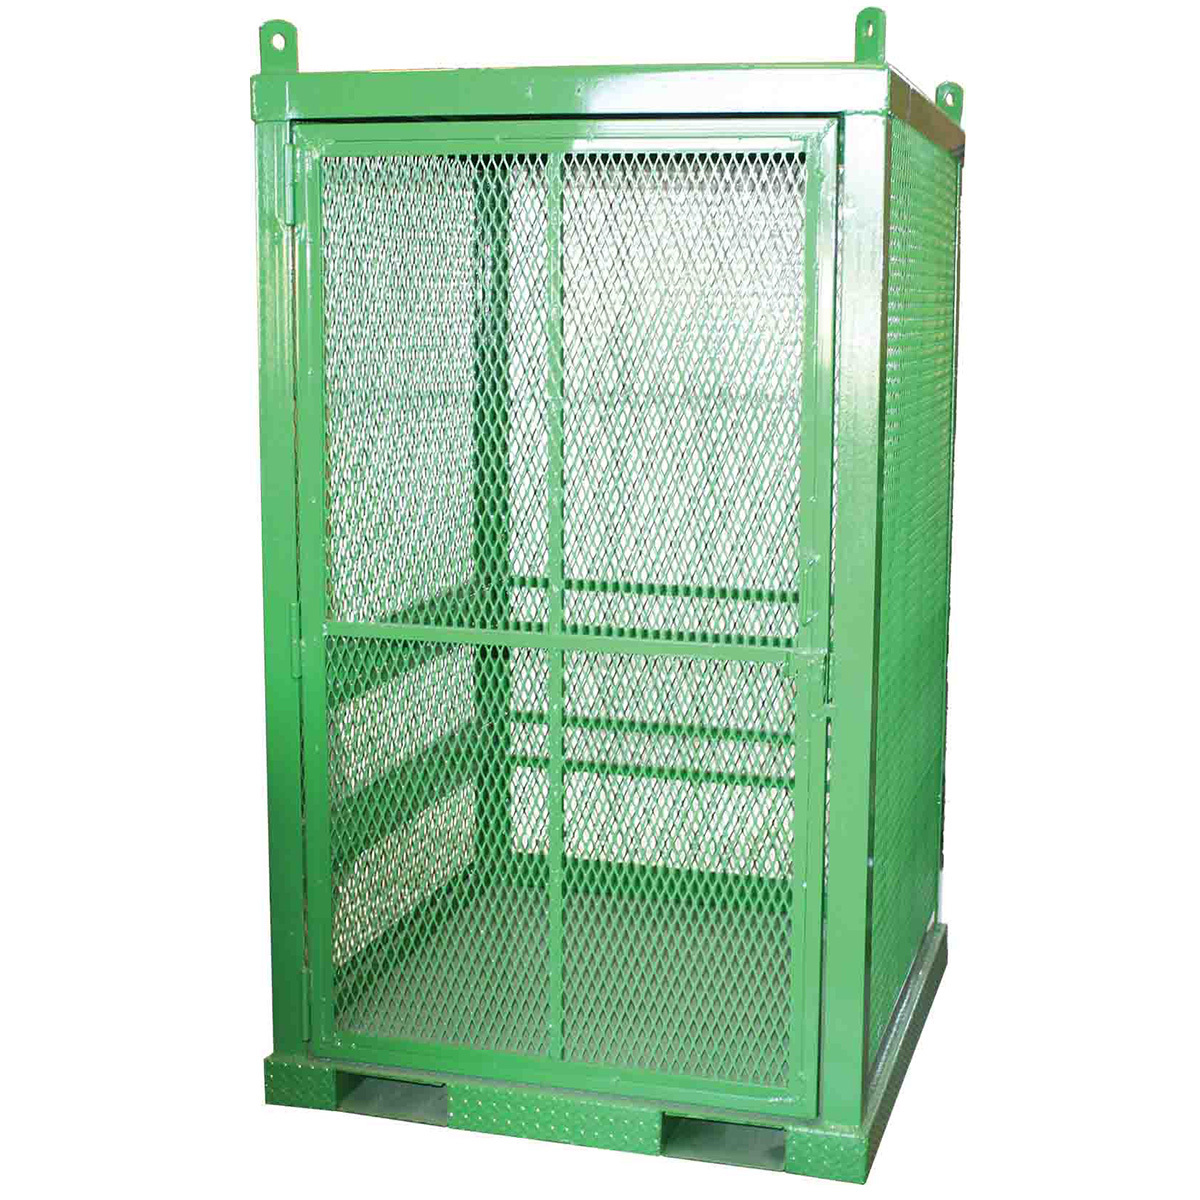 Airgas - STCSTS-9 - Saf-T-Cart Steel 9 Cylinder Cage